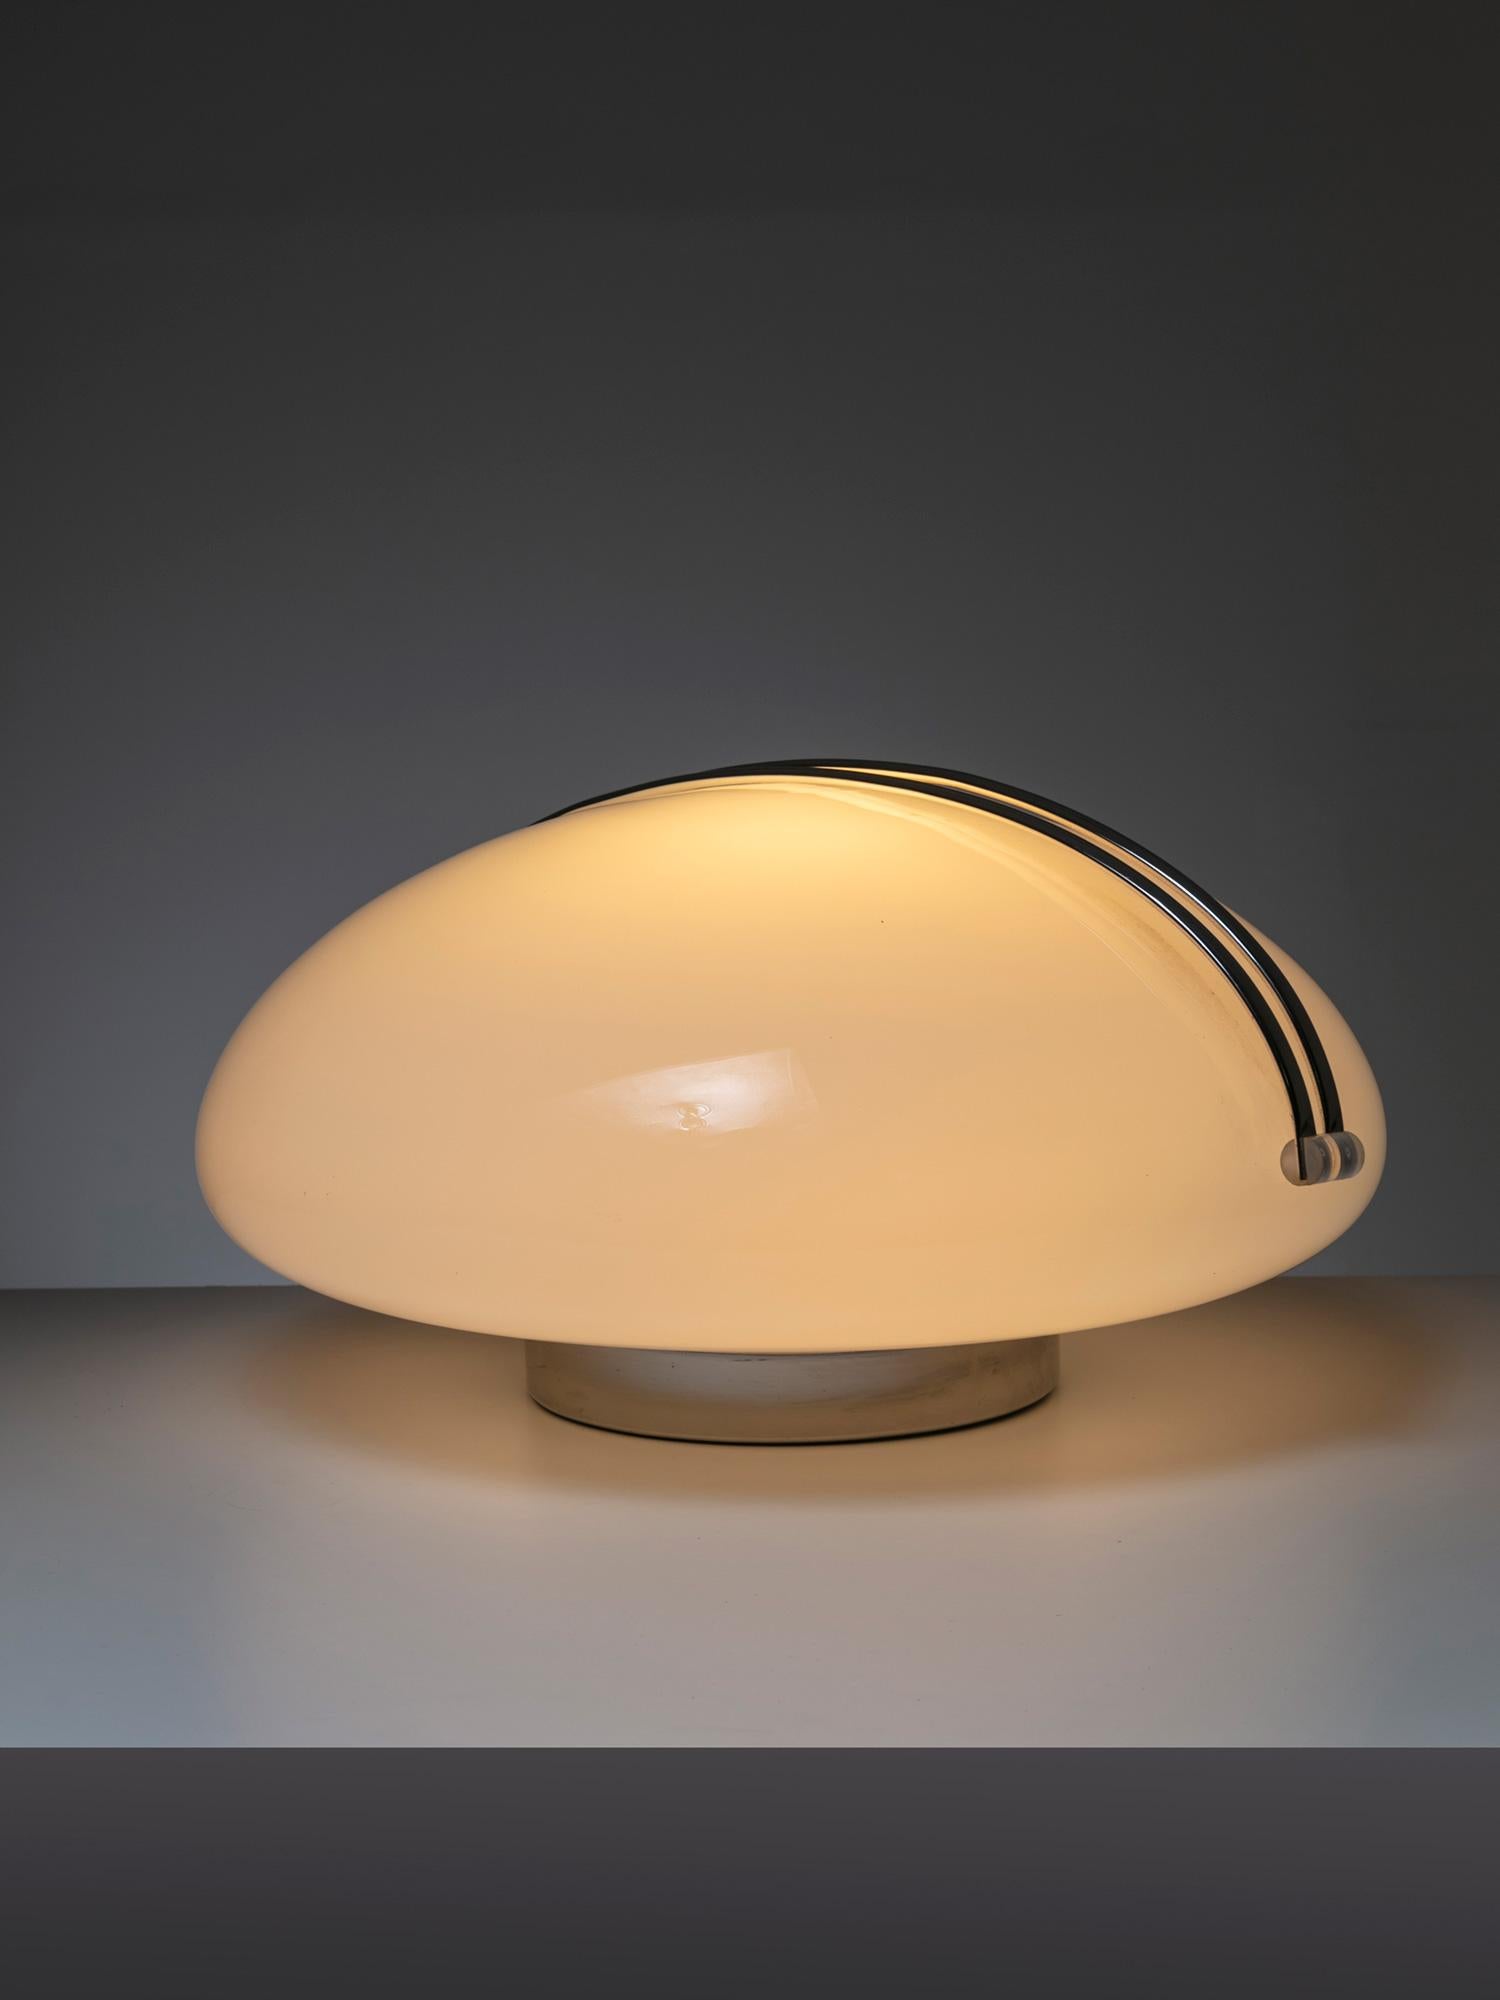 Il Cammino (The Road Ahead and the Road Back) table lamp by Angelo Mangiarotti for Iter Elettronica.
A opaline glass hill with a chrome path to follow. Adjustable light intensity activated by touching the metal element.